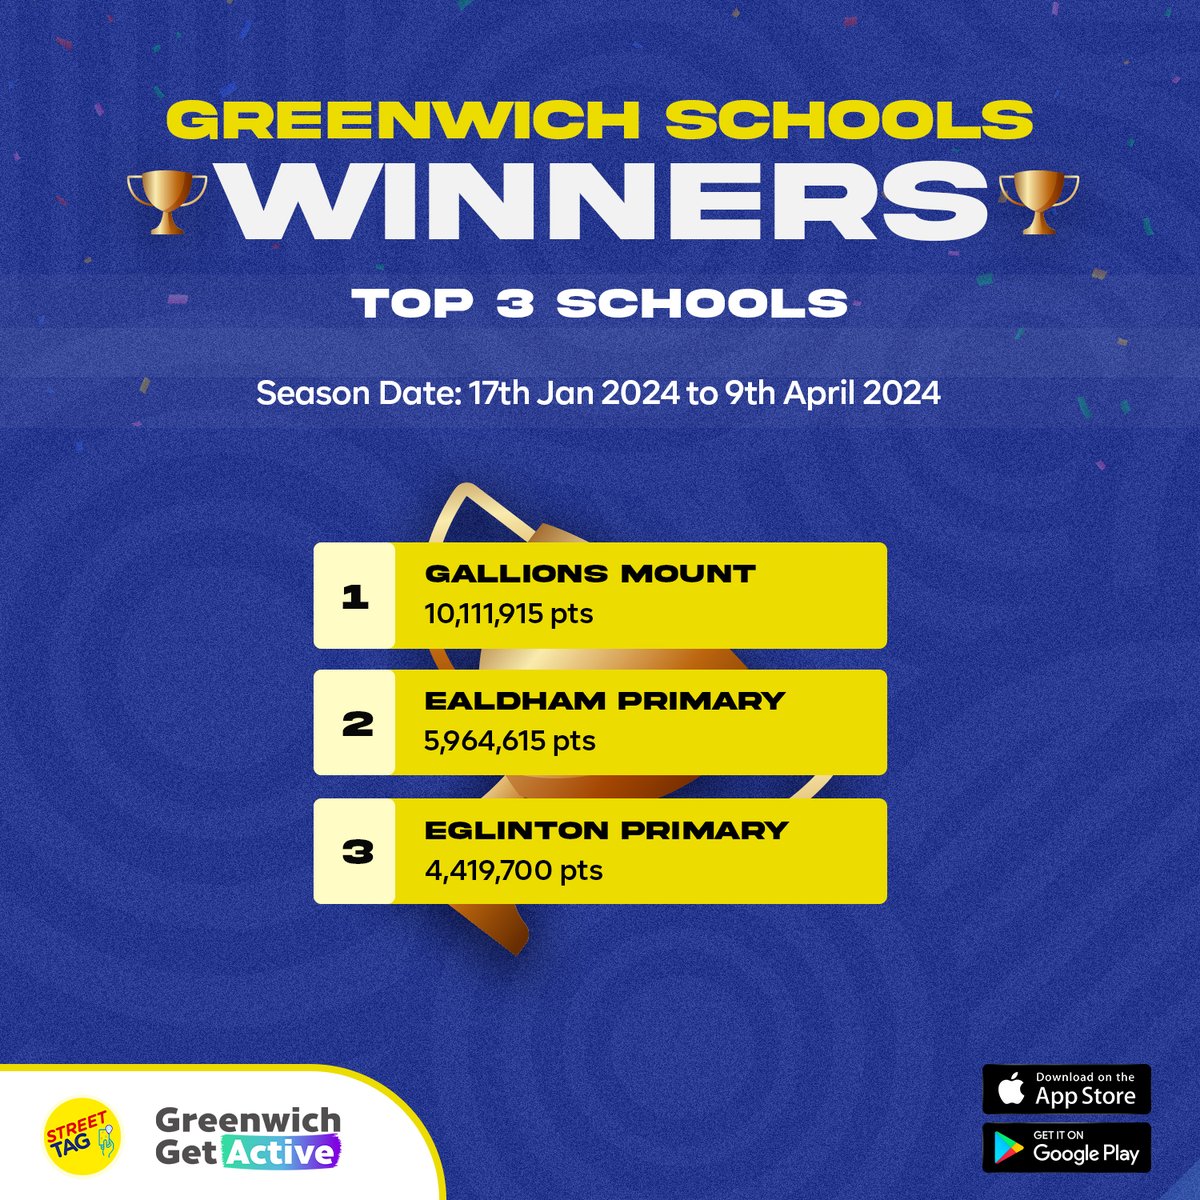 Congratulations to the Champions! 🏆🌟 We applaud the Top 3 schools on the Greenwich Schools Leaderboard for an outstanding season! 🙌 A massive round of applause to all participants! @royal_greenwich @StreetTagRBG @GallionsMount @EaldhamPrimary @EglintonSE18